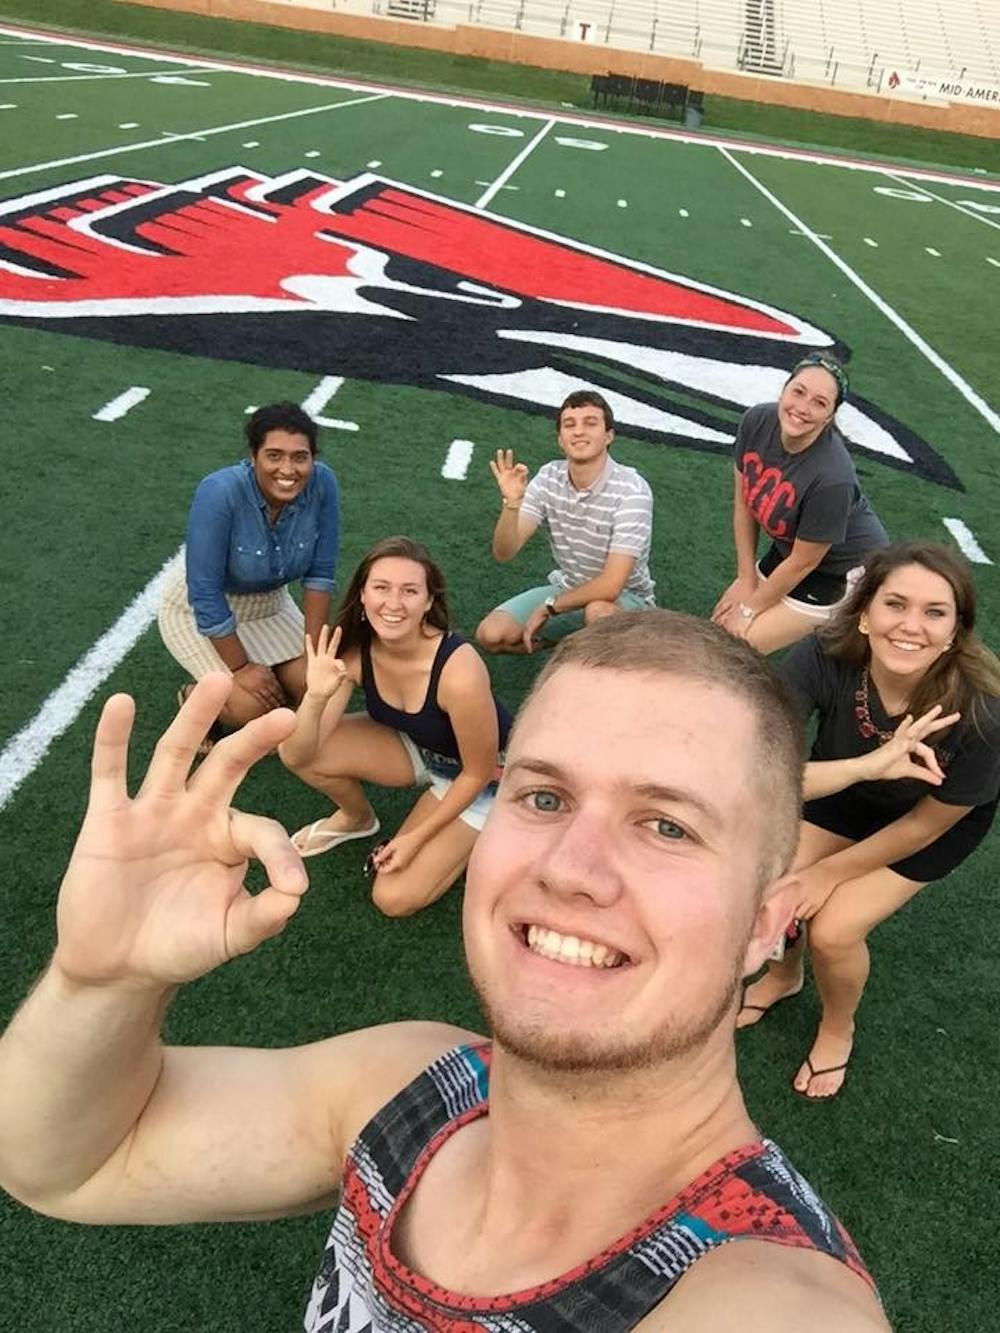 <p>Former SGA Vice President Bryan Kubel and others pose for a photo on Sept. 1 at Scheumann Stadium. The group went out to practice for the Cardinal Project, which is taking place after the football game on Sept. 3 at Scheumann Stadium. <em>PHOTO COURTESY OF FACEBOOK</em></p>